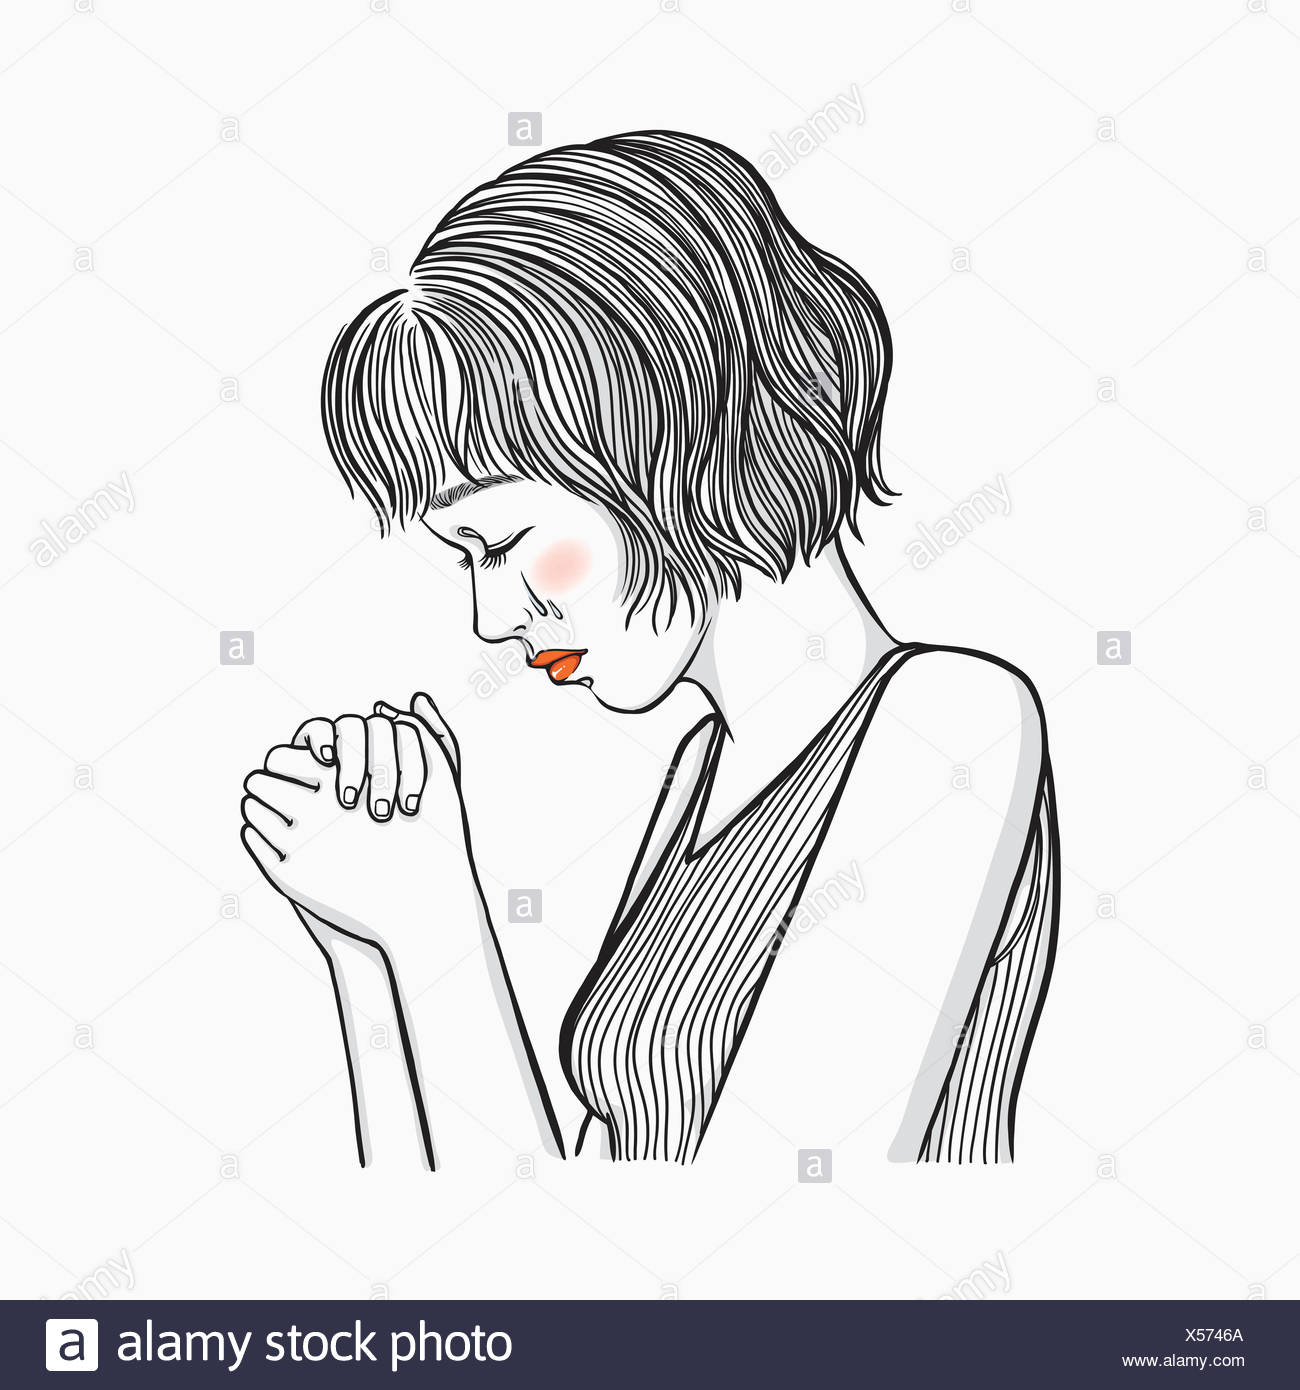 Praying Hands Drawing Cut Out Stock Images & Pictures - Alamy